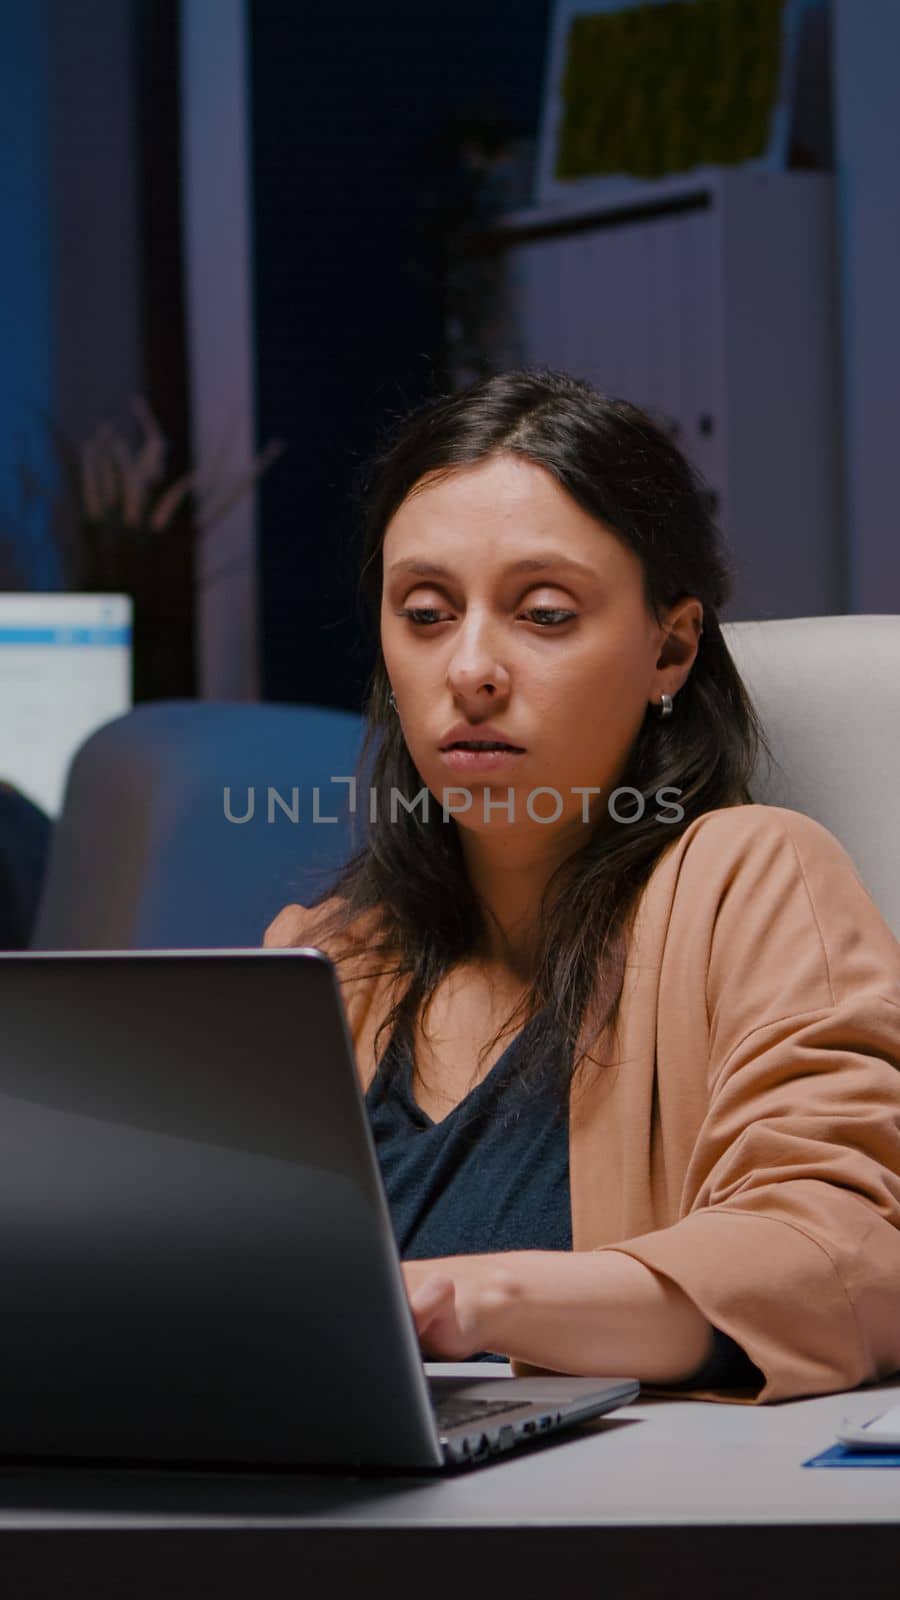 Workaholic entrepreneur woman sitting at desk table analysing financial graphics using laptop computer. Executive businesswoman planning marketing strategy working in startup business company office